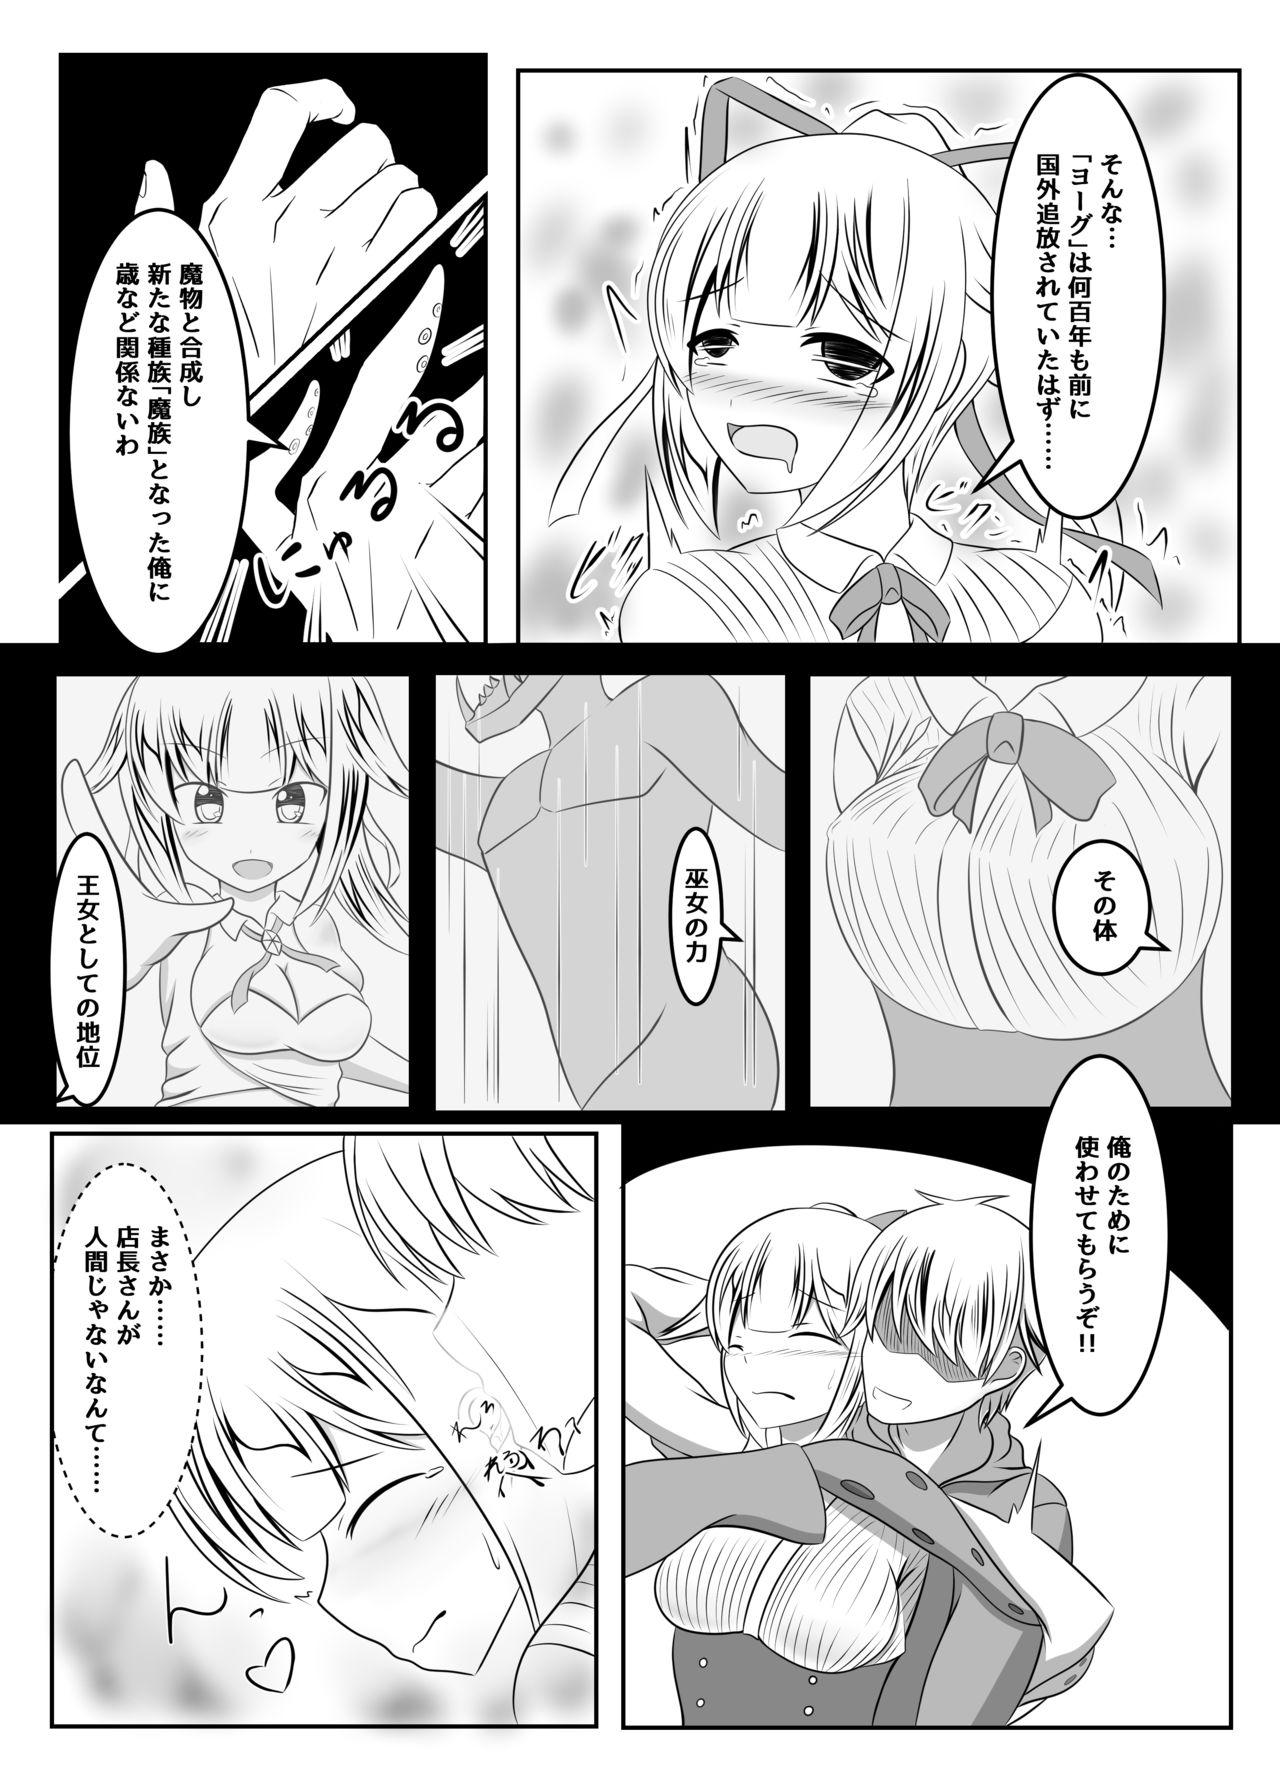 Stretching Fuuin no Miko - Original Awesome - Page 10